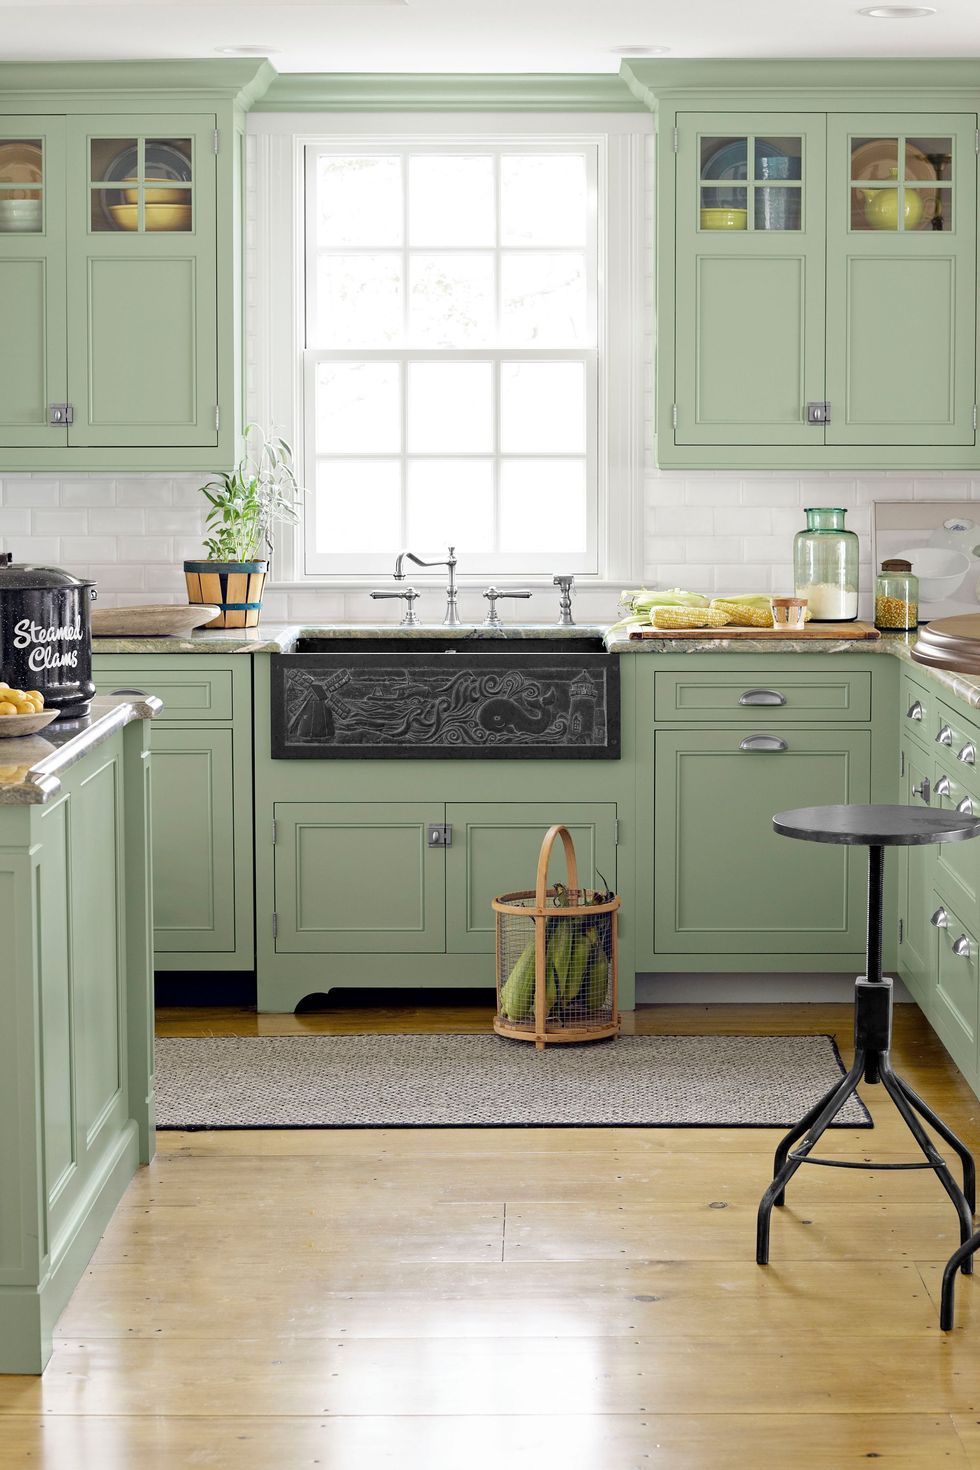 PPG Coastal Crush on green kitchen cabinets - photo by Miki Duesterhoff in Country Living. #ppgcoastalcrush #greenkitchens